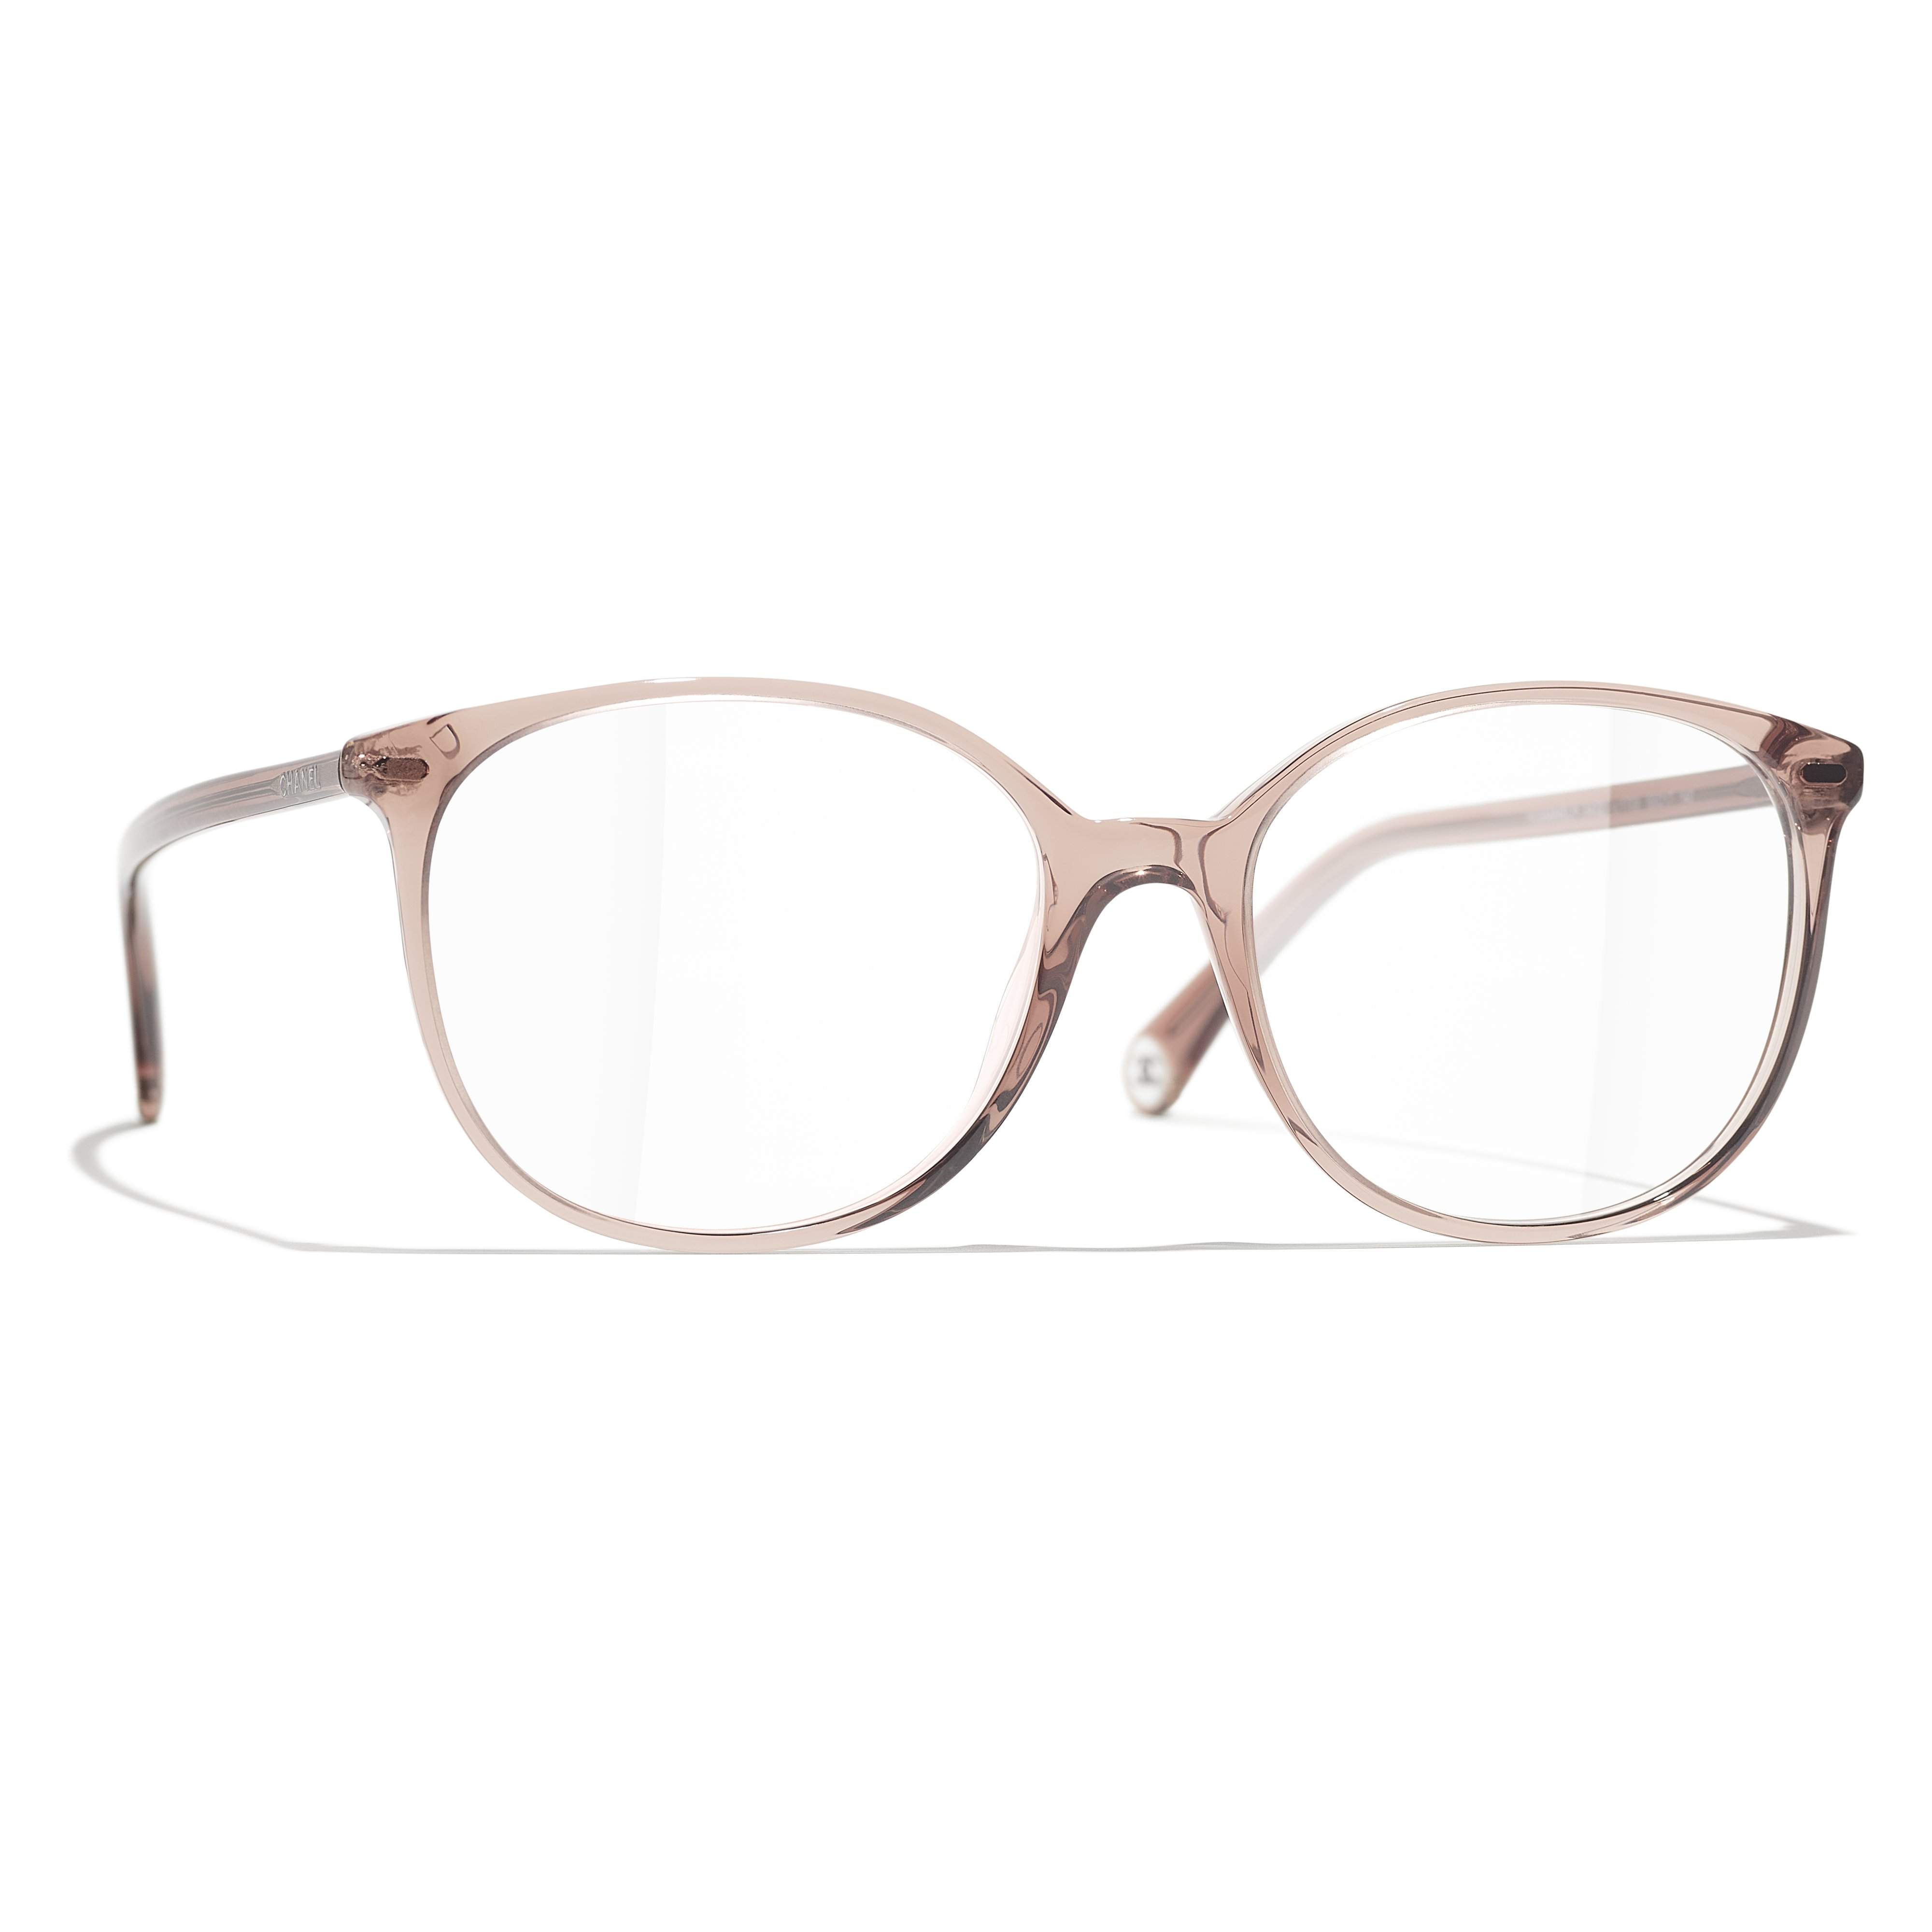 Eyeglasses CHANEL CH3446 1723 50-16 Taupe Transparent in stock